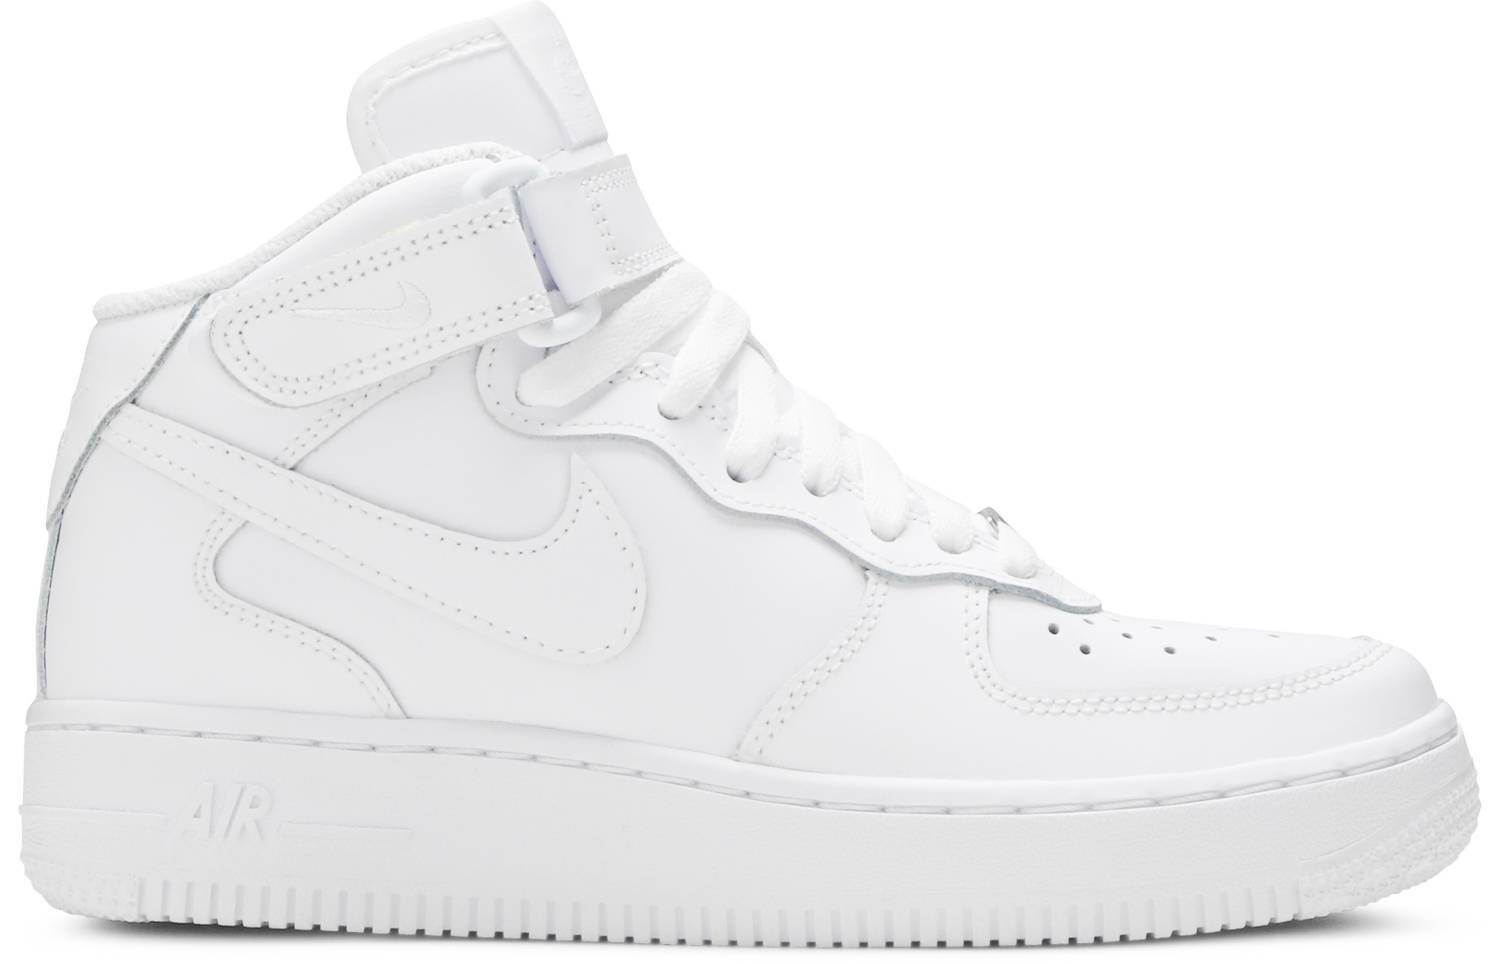 Air Force 1 Mid '06 GS 'White' - Nike - 314195 113 | GOAT